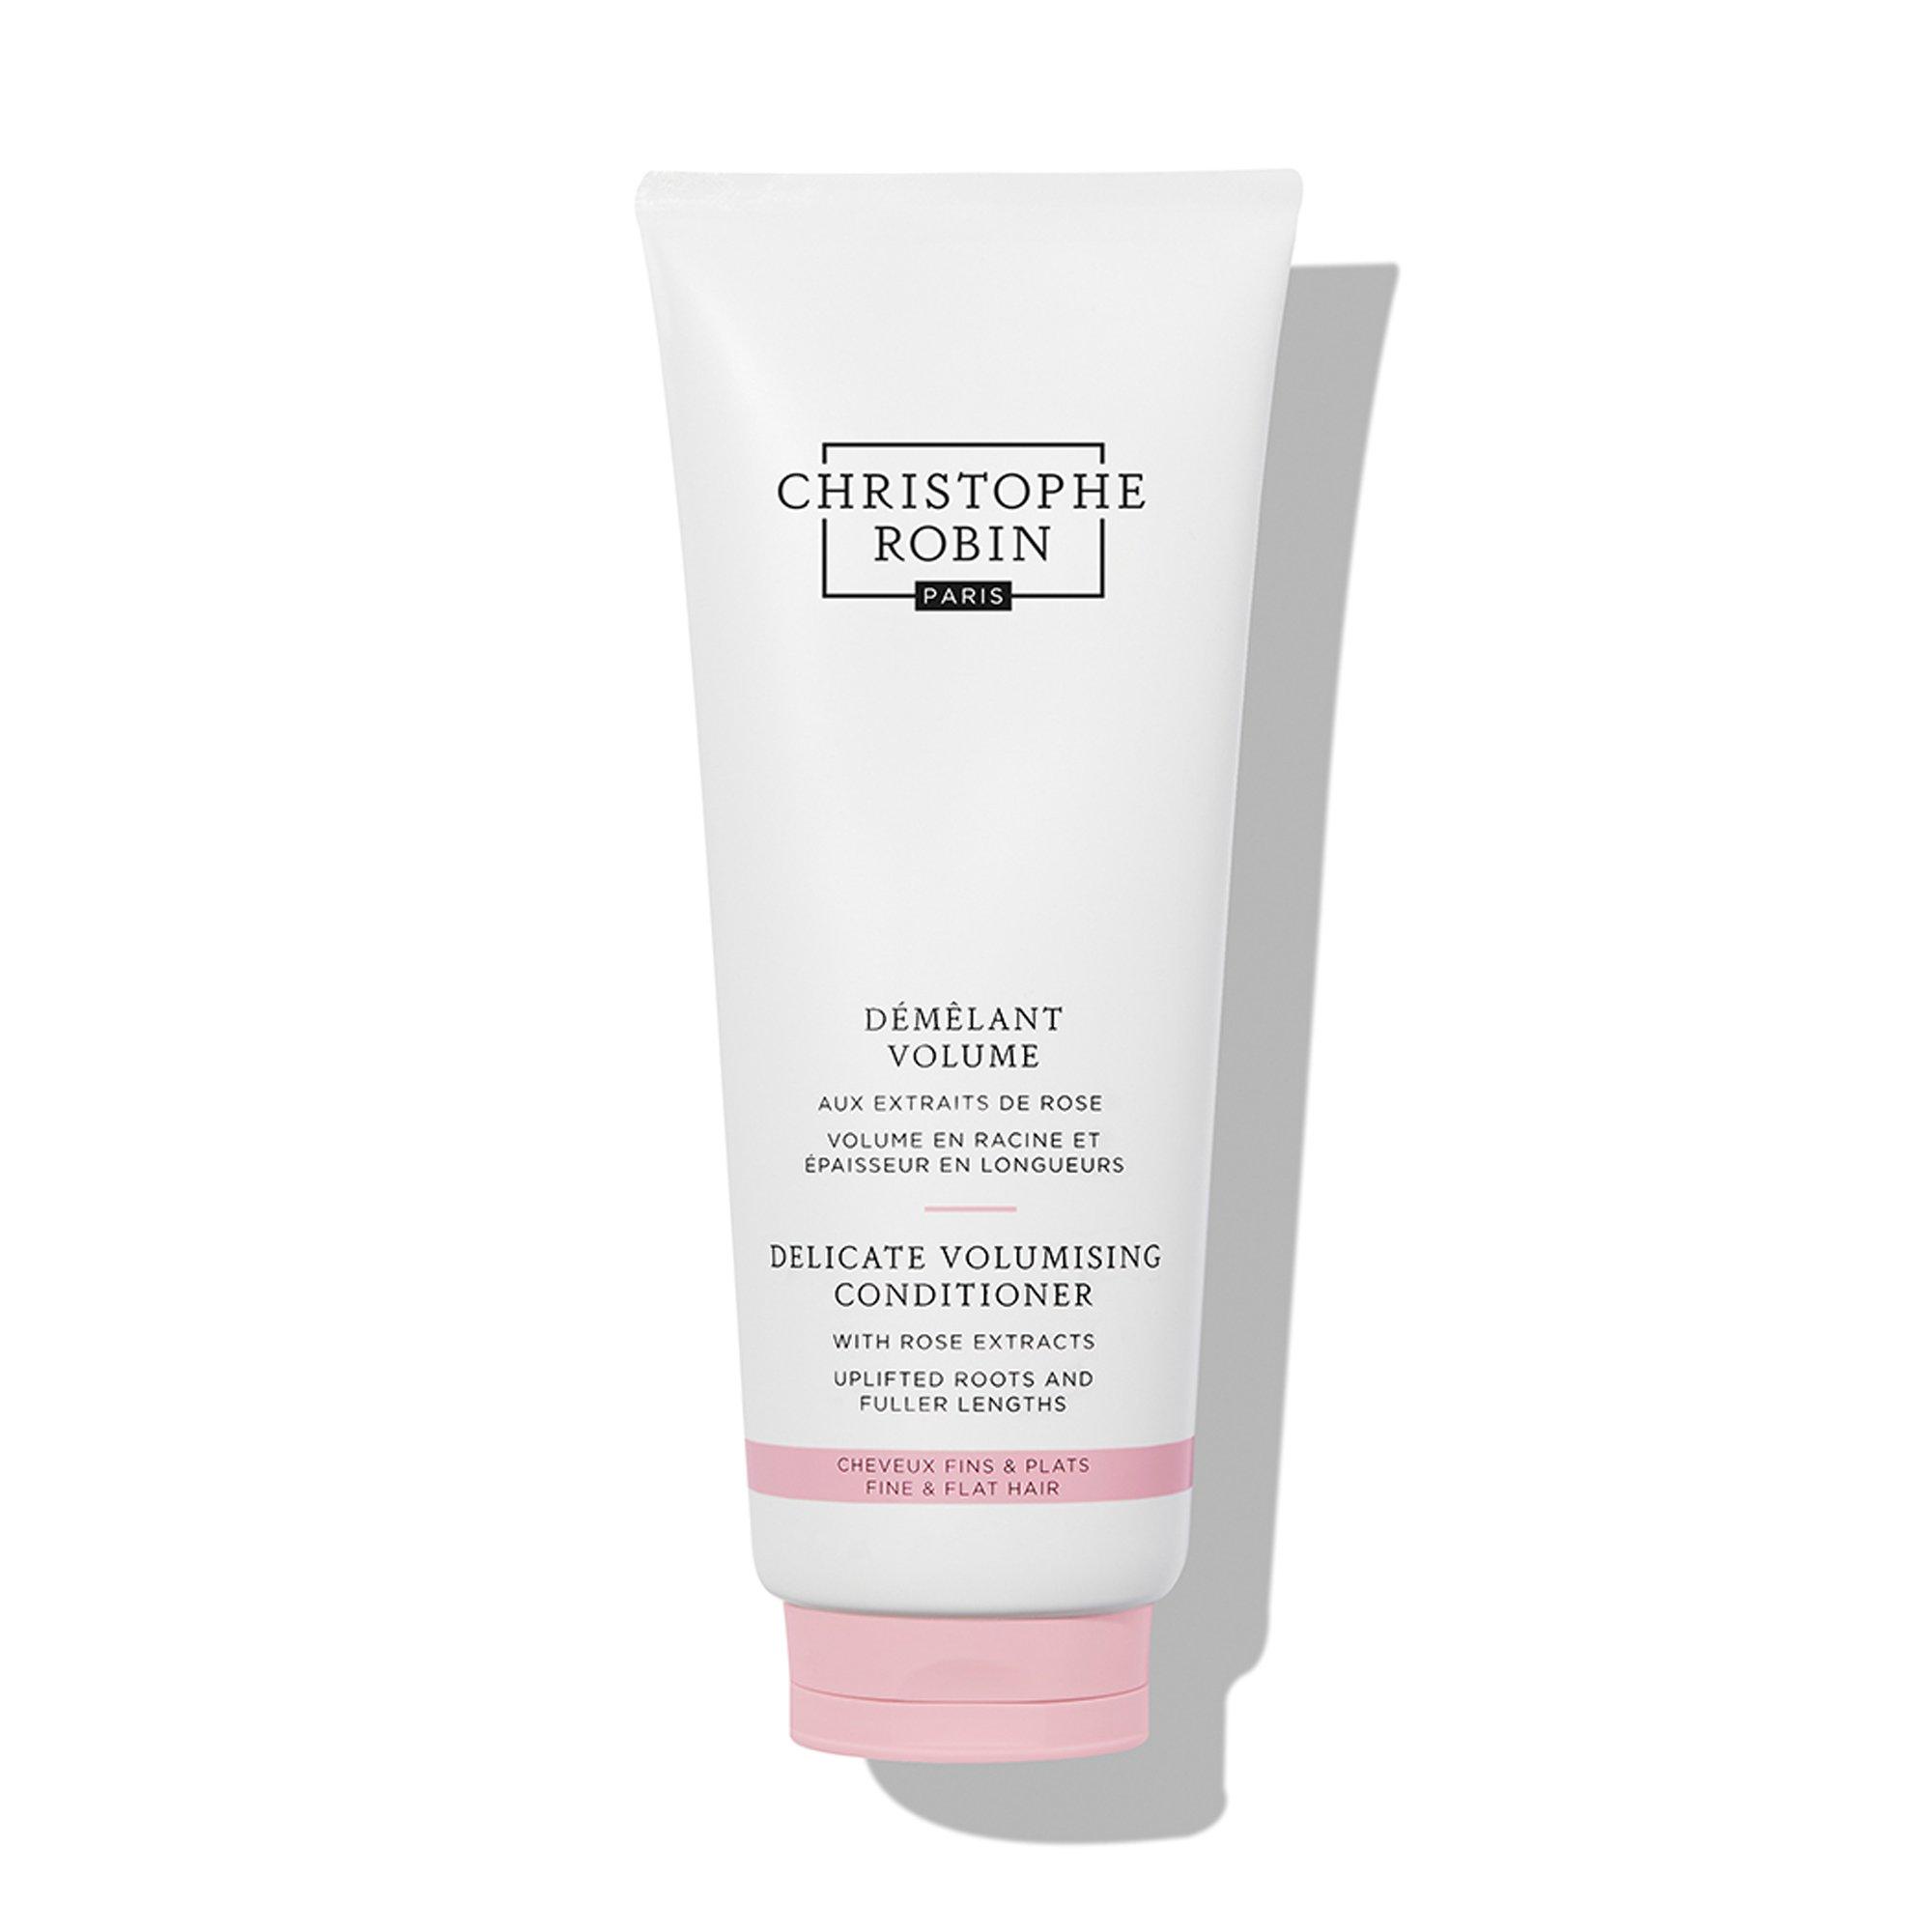 Christophe Robin Delicate Volumising with Rose Extracts Delicate Volumising Conditioner 